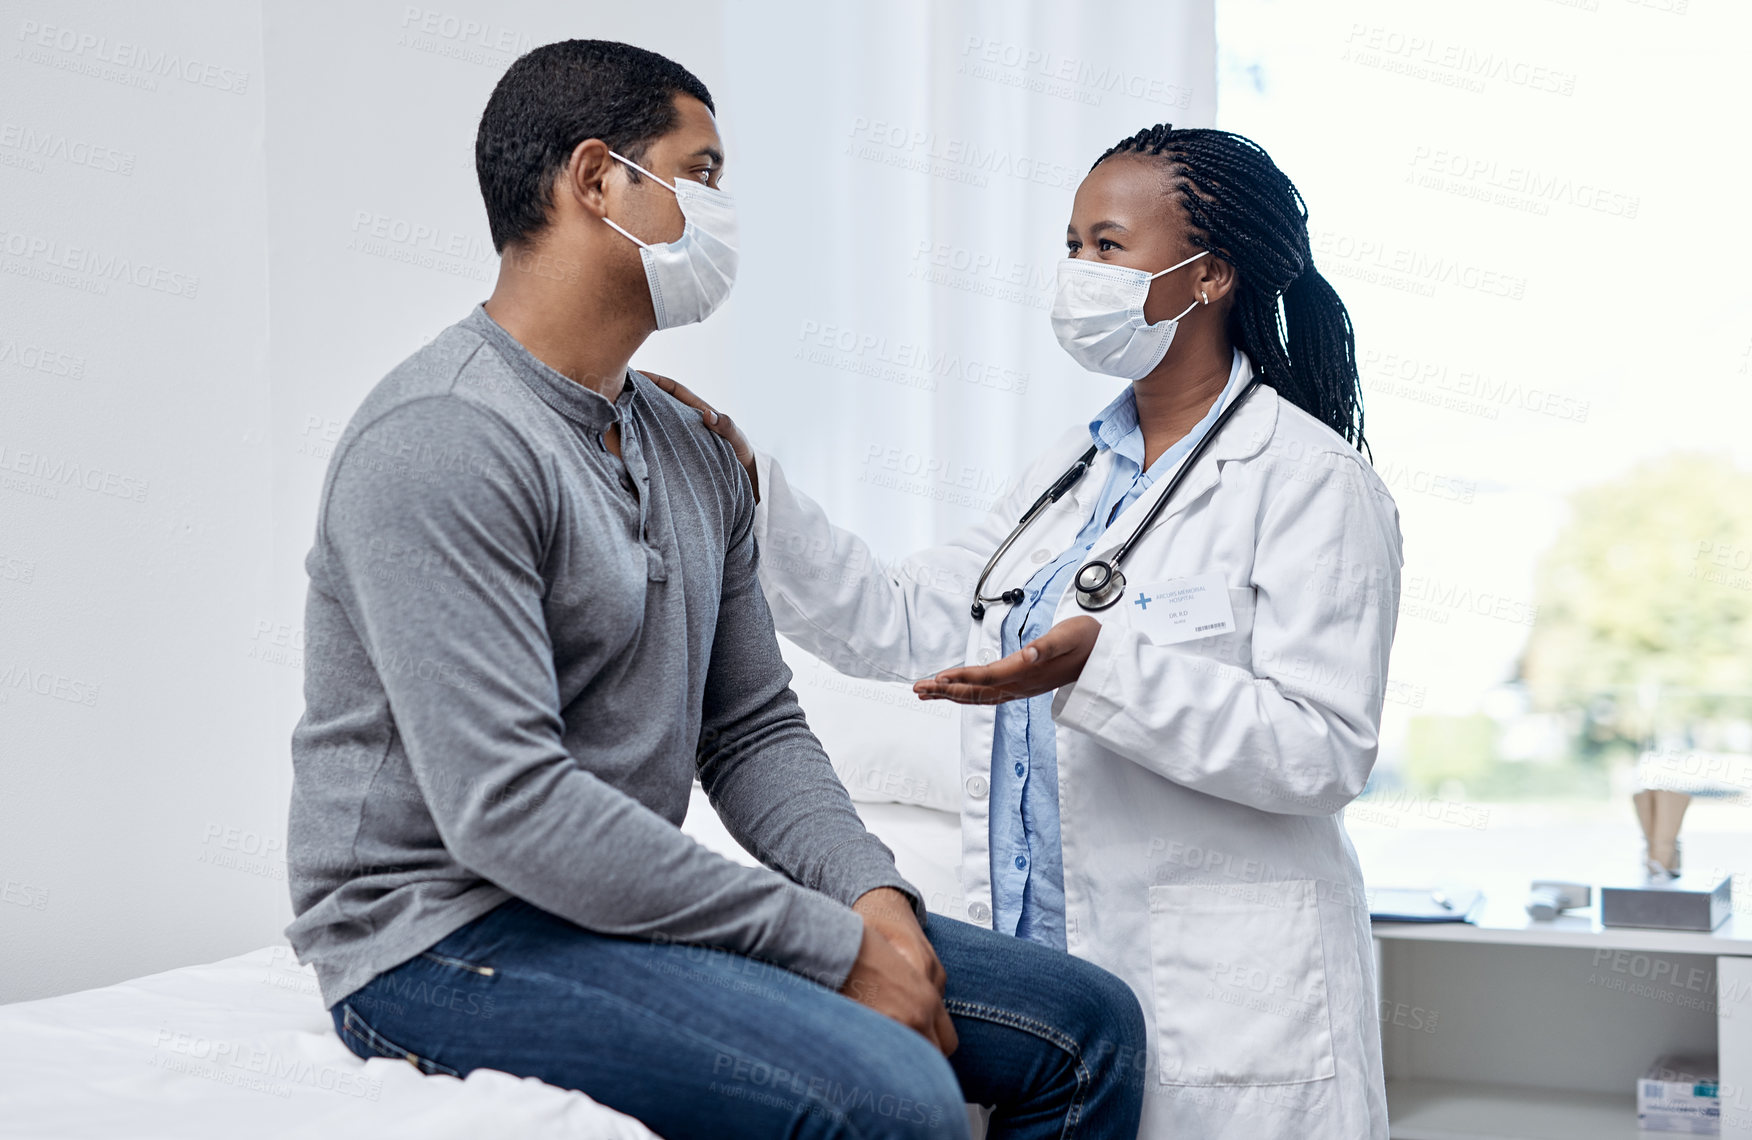 Buy stock photo Shot of a doctor having a consultation with a patient